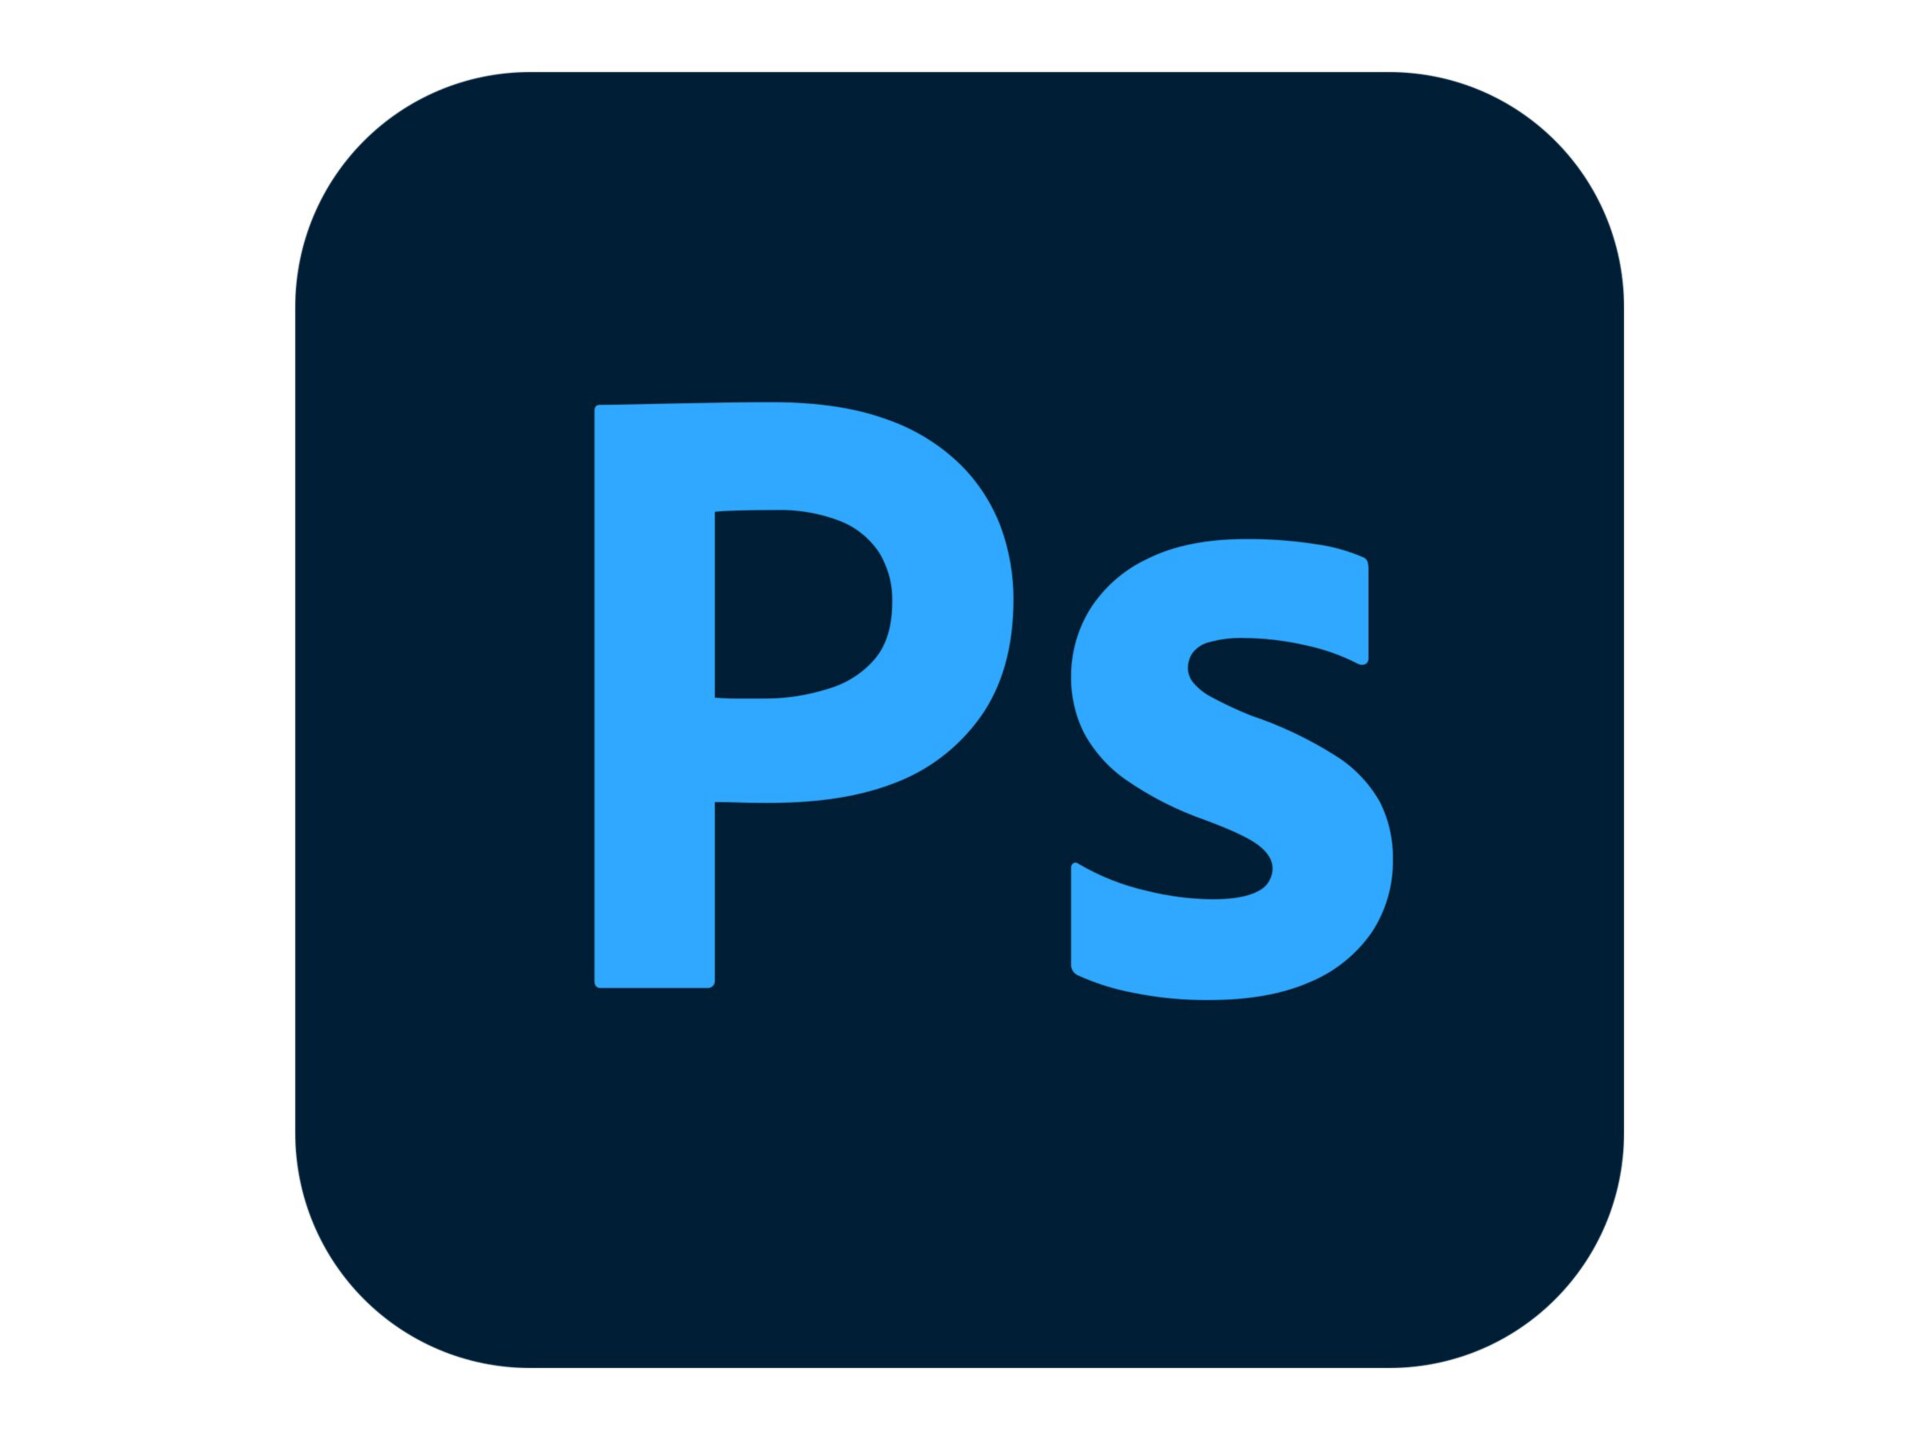 Adobe Photoshop CC for teams - Subscription New (30 months) - 1 named user